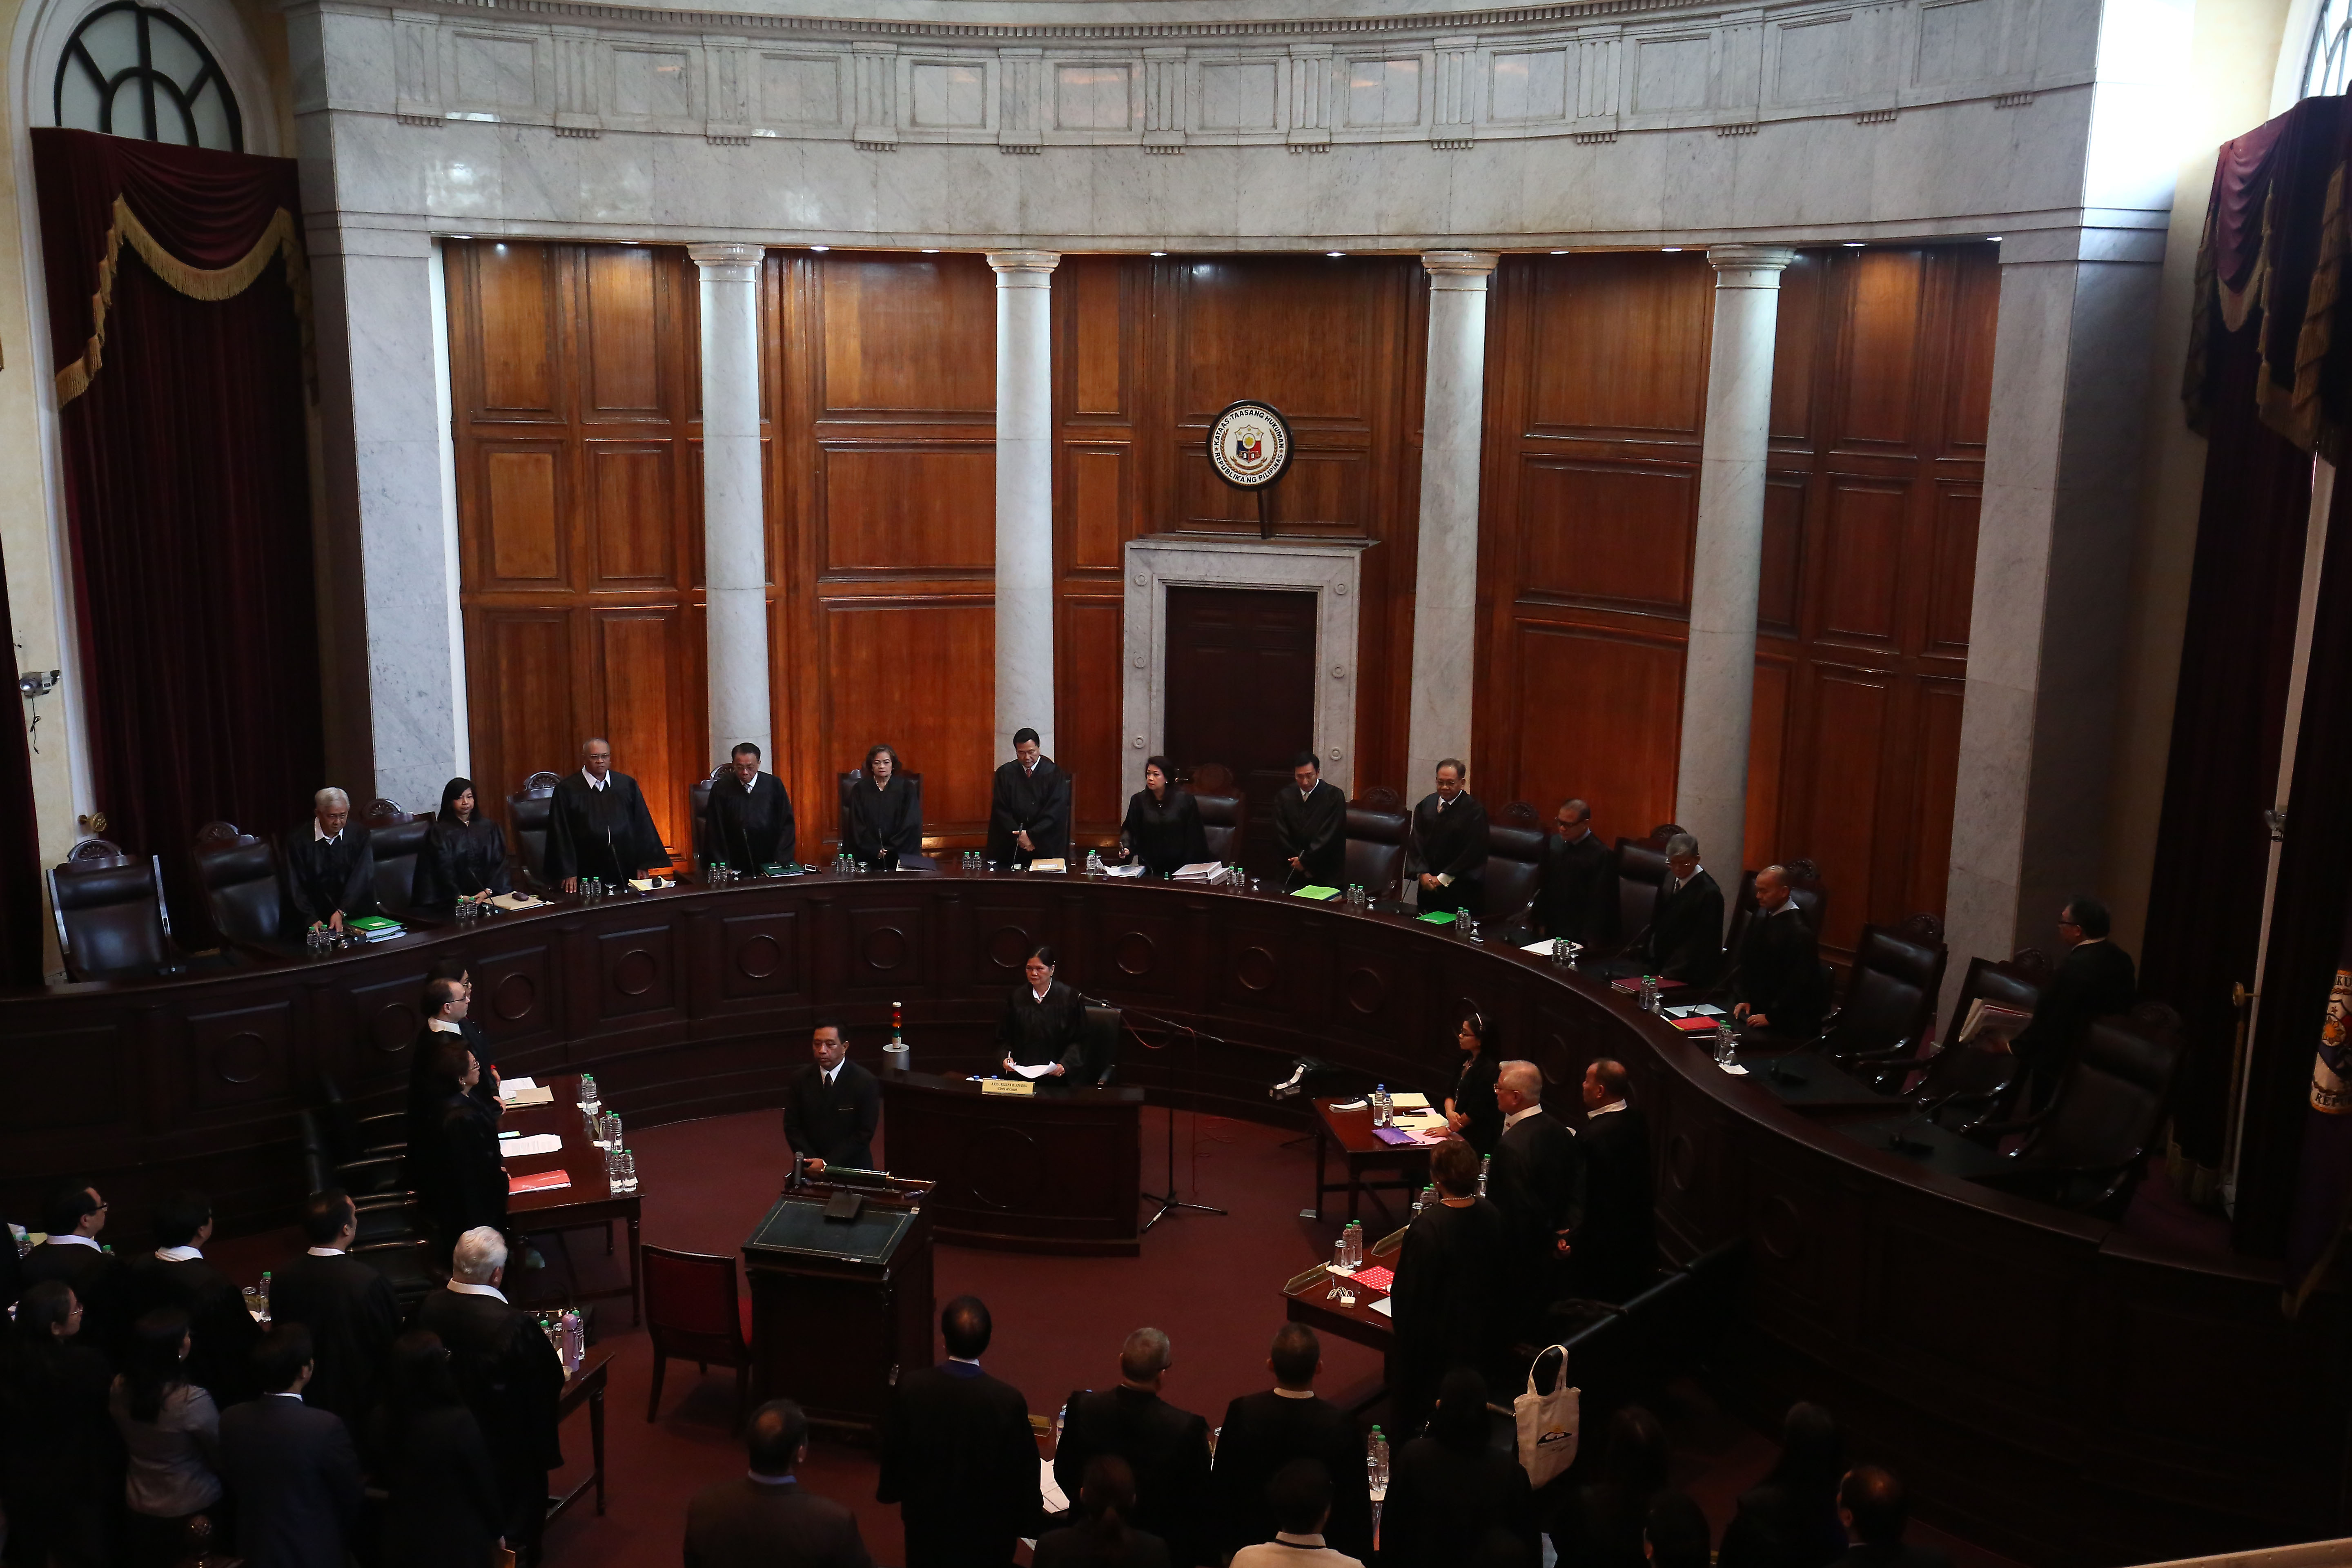 ORAL ARGUMENTS. Supreme Court justices enter as the oral arguments on the proposed burial of late dictator Ferdinand Marcos at the Libingan ng mga Bayani starts at the Supreme Court in Manila on August 31, 2016. Photo by Ben Nabong/Rappler 